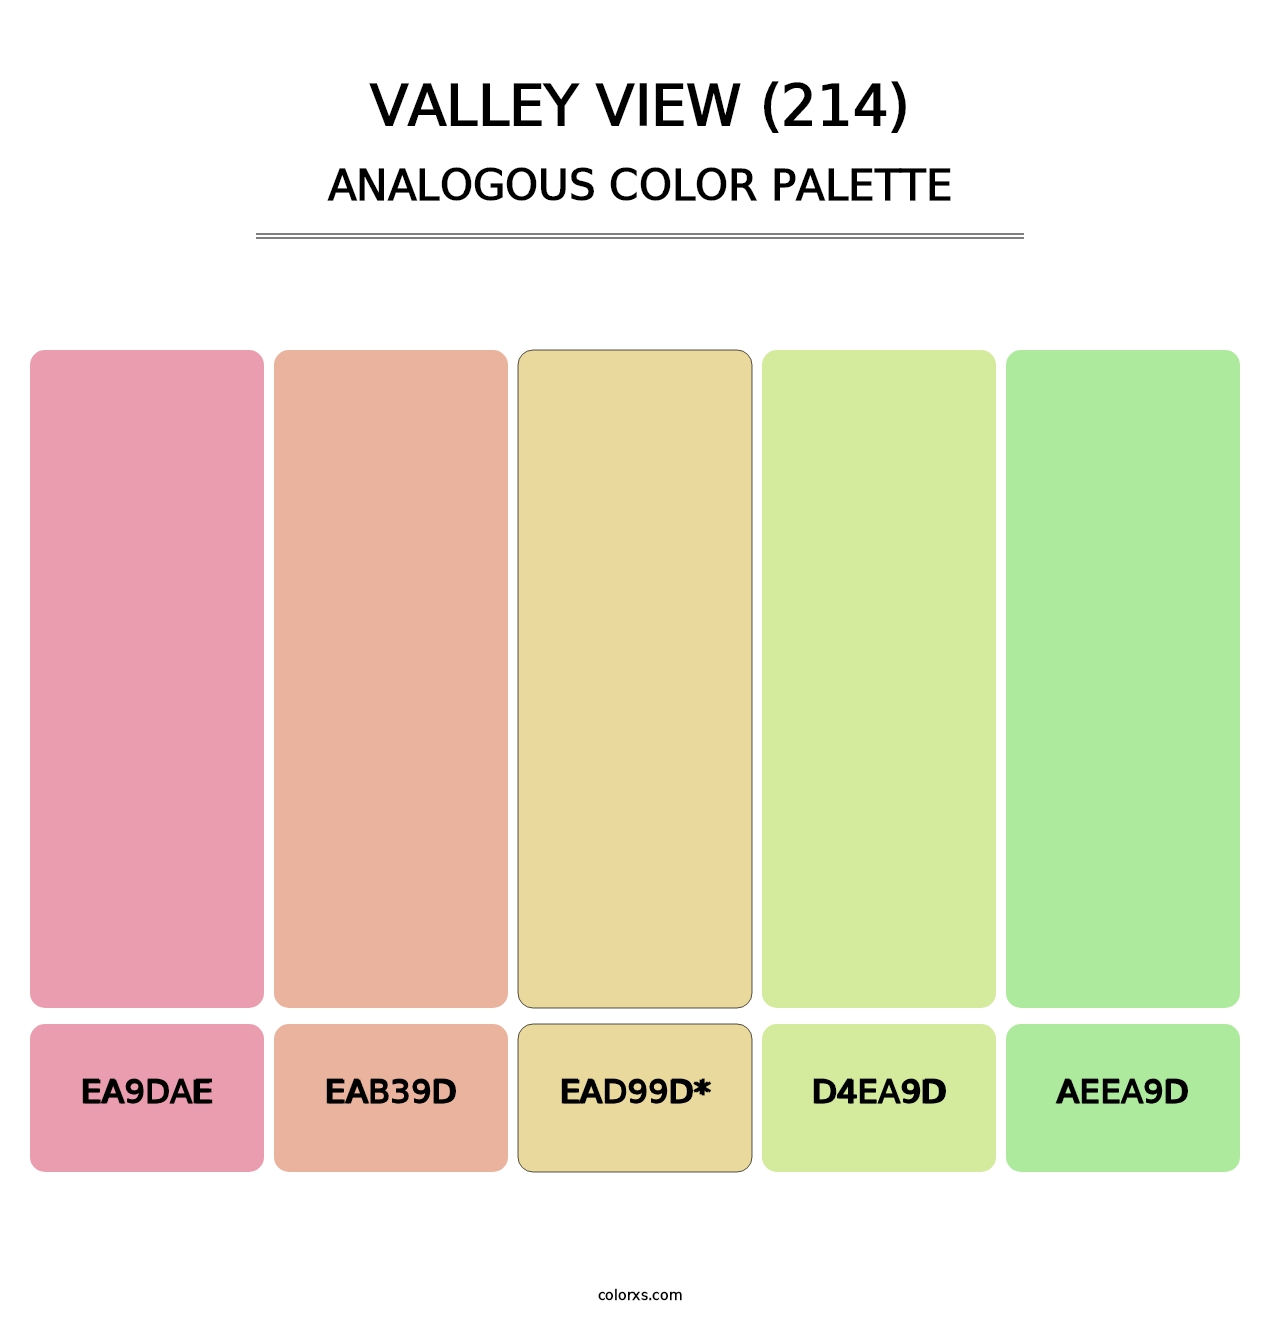 Valley View (214) - Analogous Color Palette